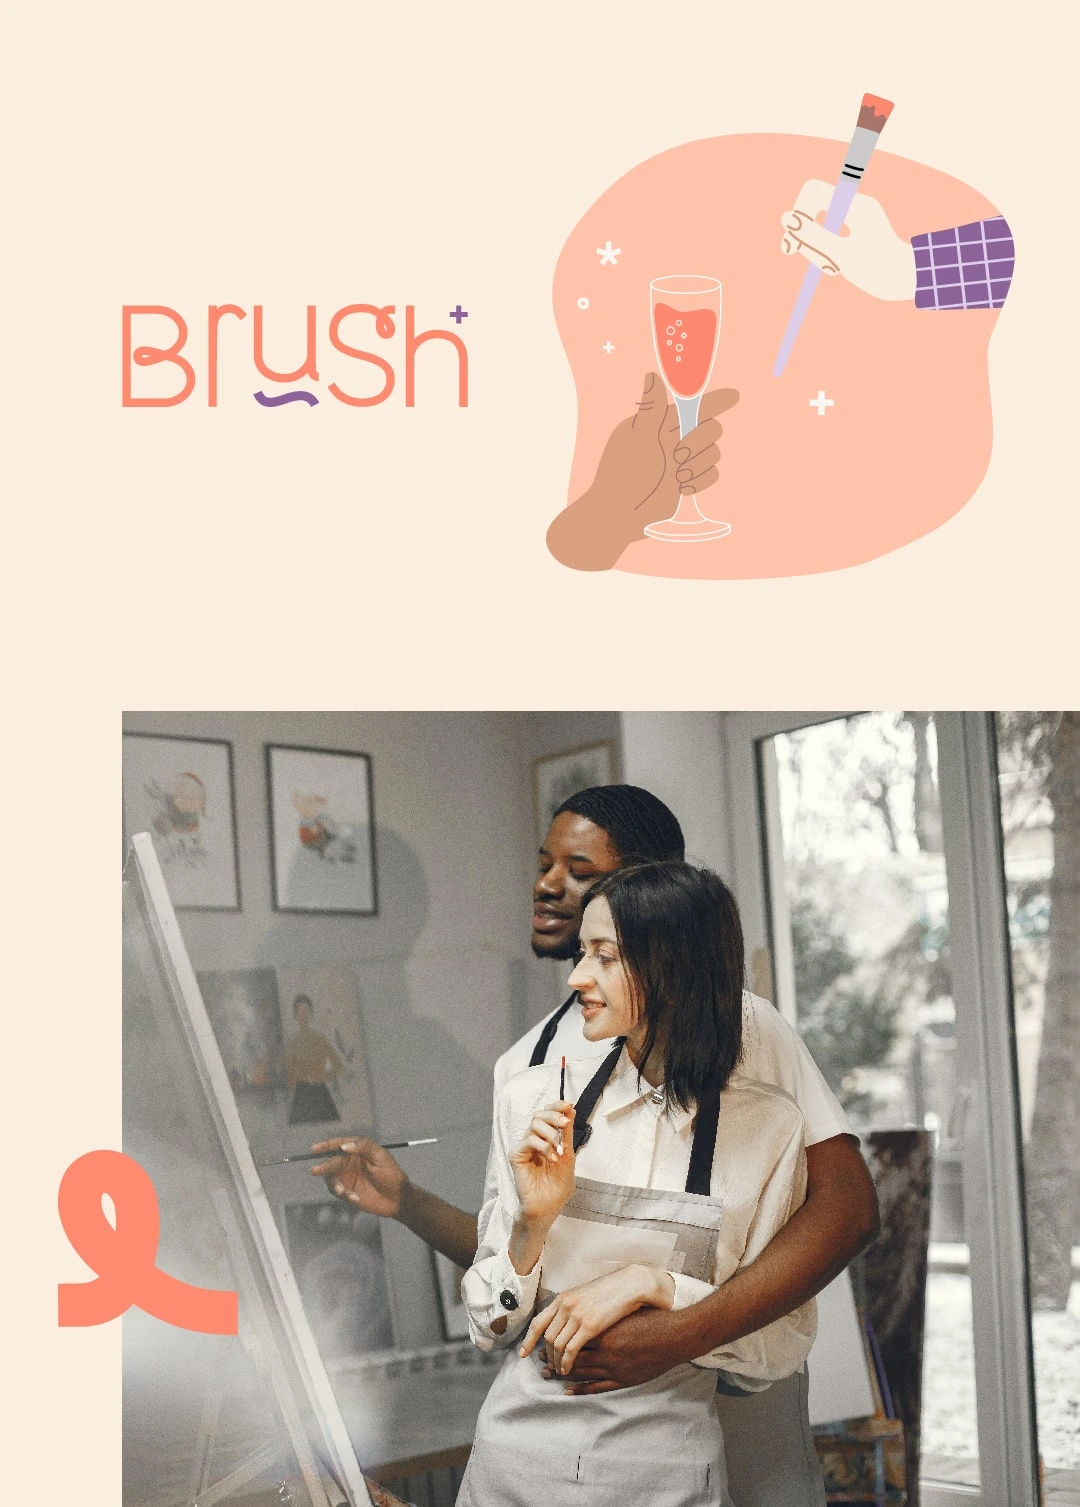 Logo and image of Brush, a marketing project created for them by Komsulting.